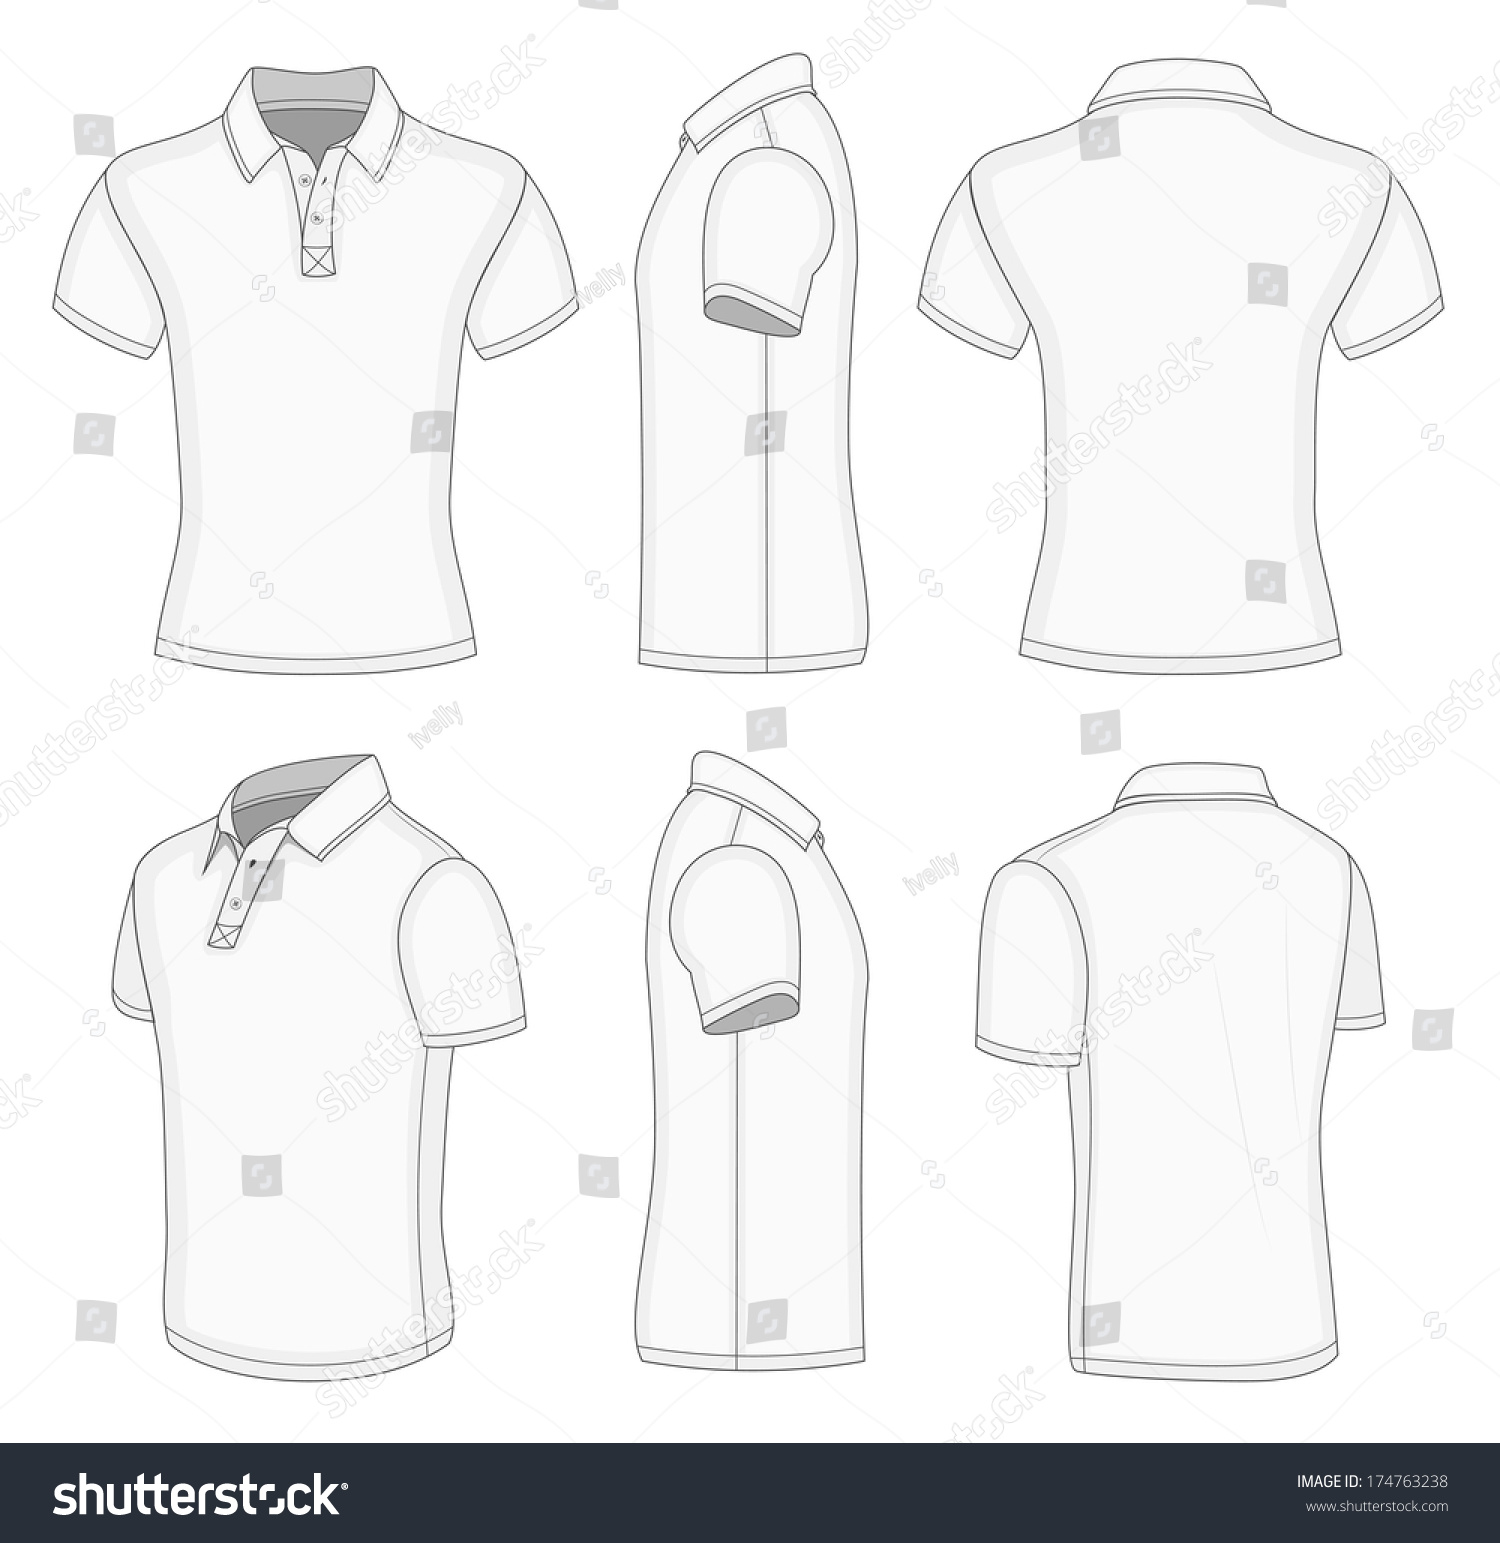 Download All Views Mens White Short Sleeve Stock Vector 174763238 ...